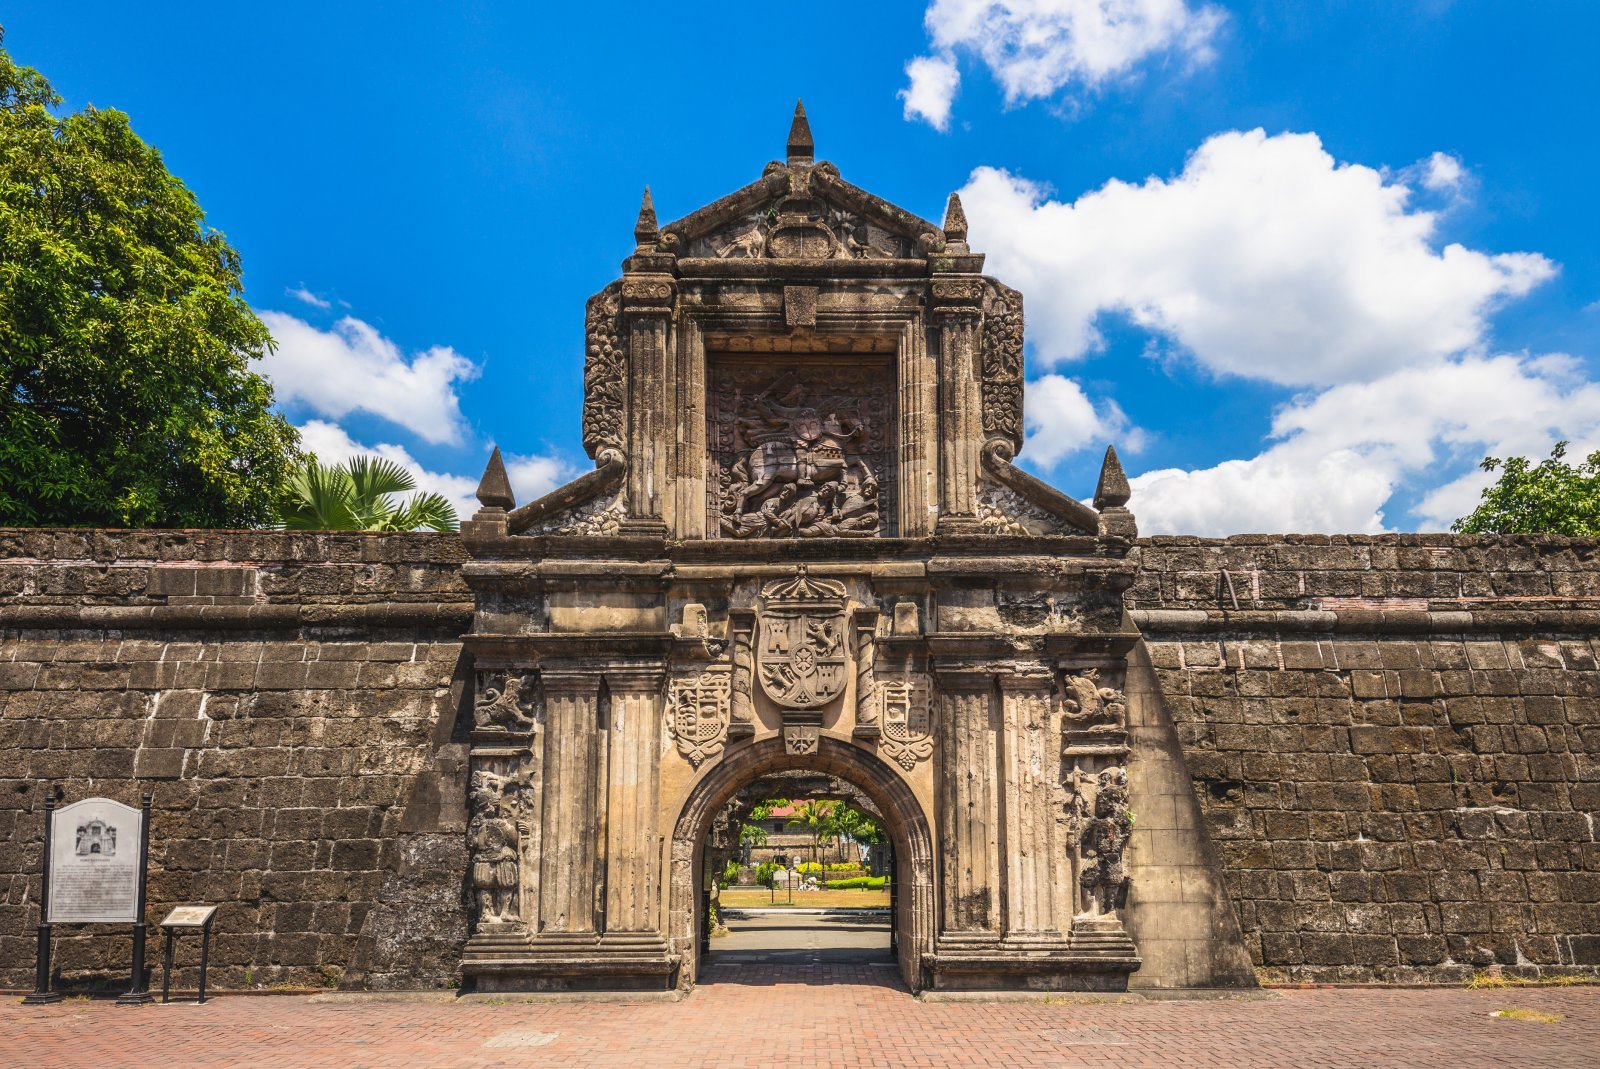 <p class="wp-caption-text">Image Credit: Shutterstock / Richie Chan</p>  <p><span>Fort Santiago, located in the historic walled city of Intramuros in Manila, Philippines, is a citadel first built by Spanish conquistador Miguel López de Legazpi in the late 16th century. This fortress is part of the structures of the city of Manila, deemed of great historical, cultural, and architectural significance.</span></p> <p><span>Initially constructed in 1571, the fort is named after Saint James the Great (Santiago in Spanish), the patron saint of Spain, and was designed to protect the newly formed city from foreign invasions and pirate attacks. Over the centuries, Fort Santiago has played a crucial role in the country’s history, serving variously as a military barracks, a prison, and a site of numerous significant events in Philippine history.</span></p> <p><span>The fort is perhaps best known for its association with Dr. José Rizal, the Philippines’ national hero, who was imprisoned here before his execution in 1896. His final footsteps from his cell to the location of his execution are marked by bronze footprints, making it a poignant site of pilgrimage for many Filipinos.</span></p> <p><span>Fort Santiago has impressive stone walls and ancient gates, and its location is at the mouth of the Pasig River. Its design incorporates medieval and Renaissance elements, with its defensive structure reflecting the military architectural techniques of the period. Today, it houses the Rizal Shrine Museum, dedicated to the life and works of José Rizal, and features well-preserved dungeons, cannons, and the iconic Rajah Sulayman Theater.</span></p> <p><span>As an important historical and tourist site, Fort Santiago offers visitors insights into the Philippines’ colonial past, the struggle for independence, and the heroism of one of its most revered figures. </span></p>